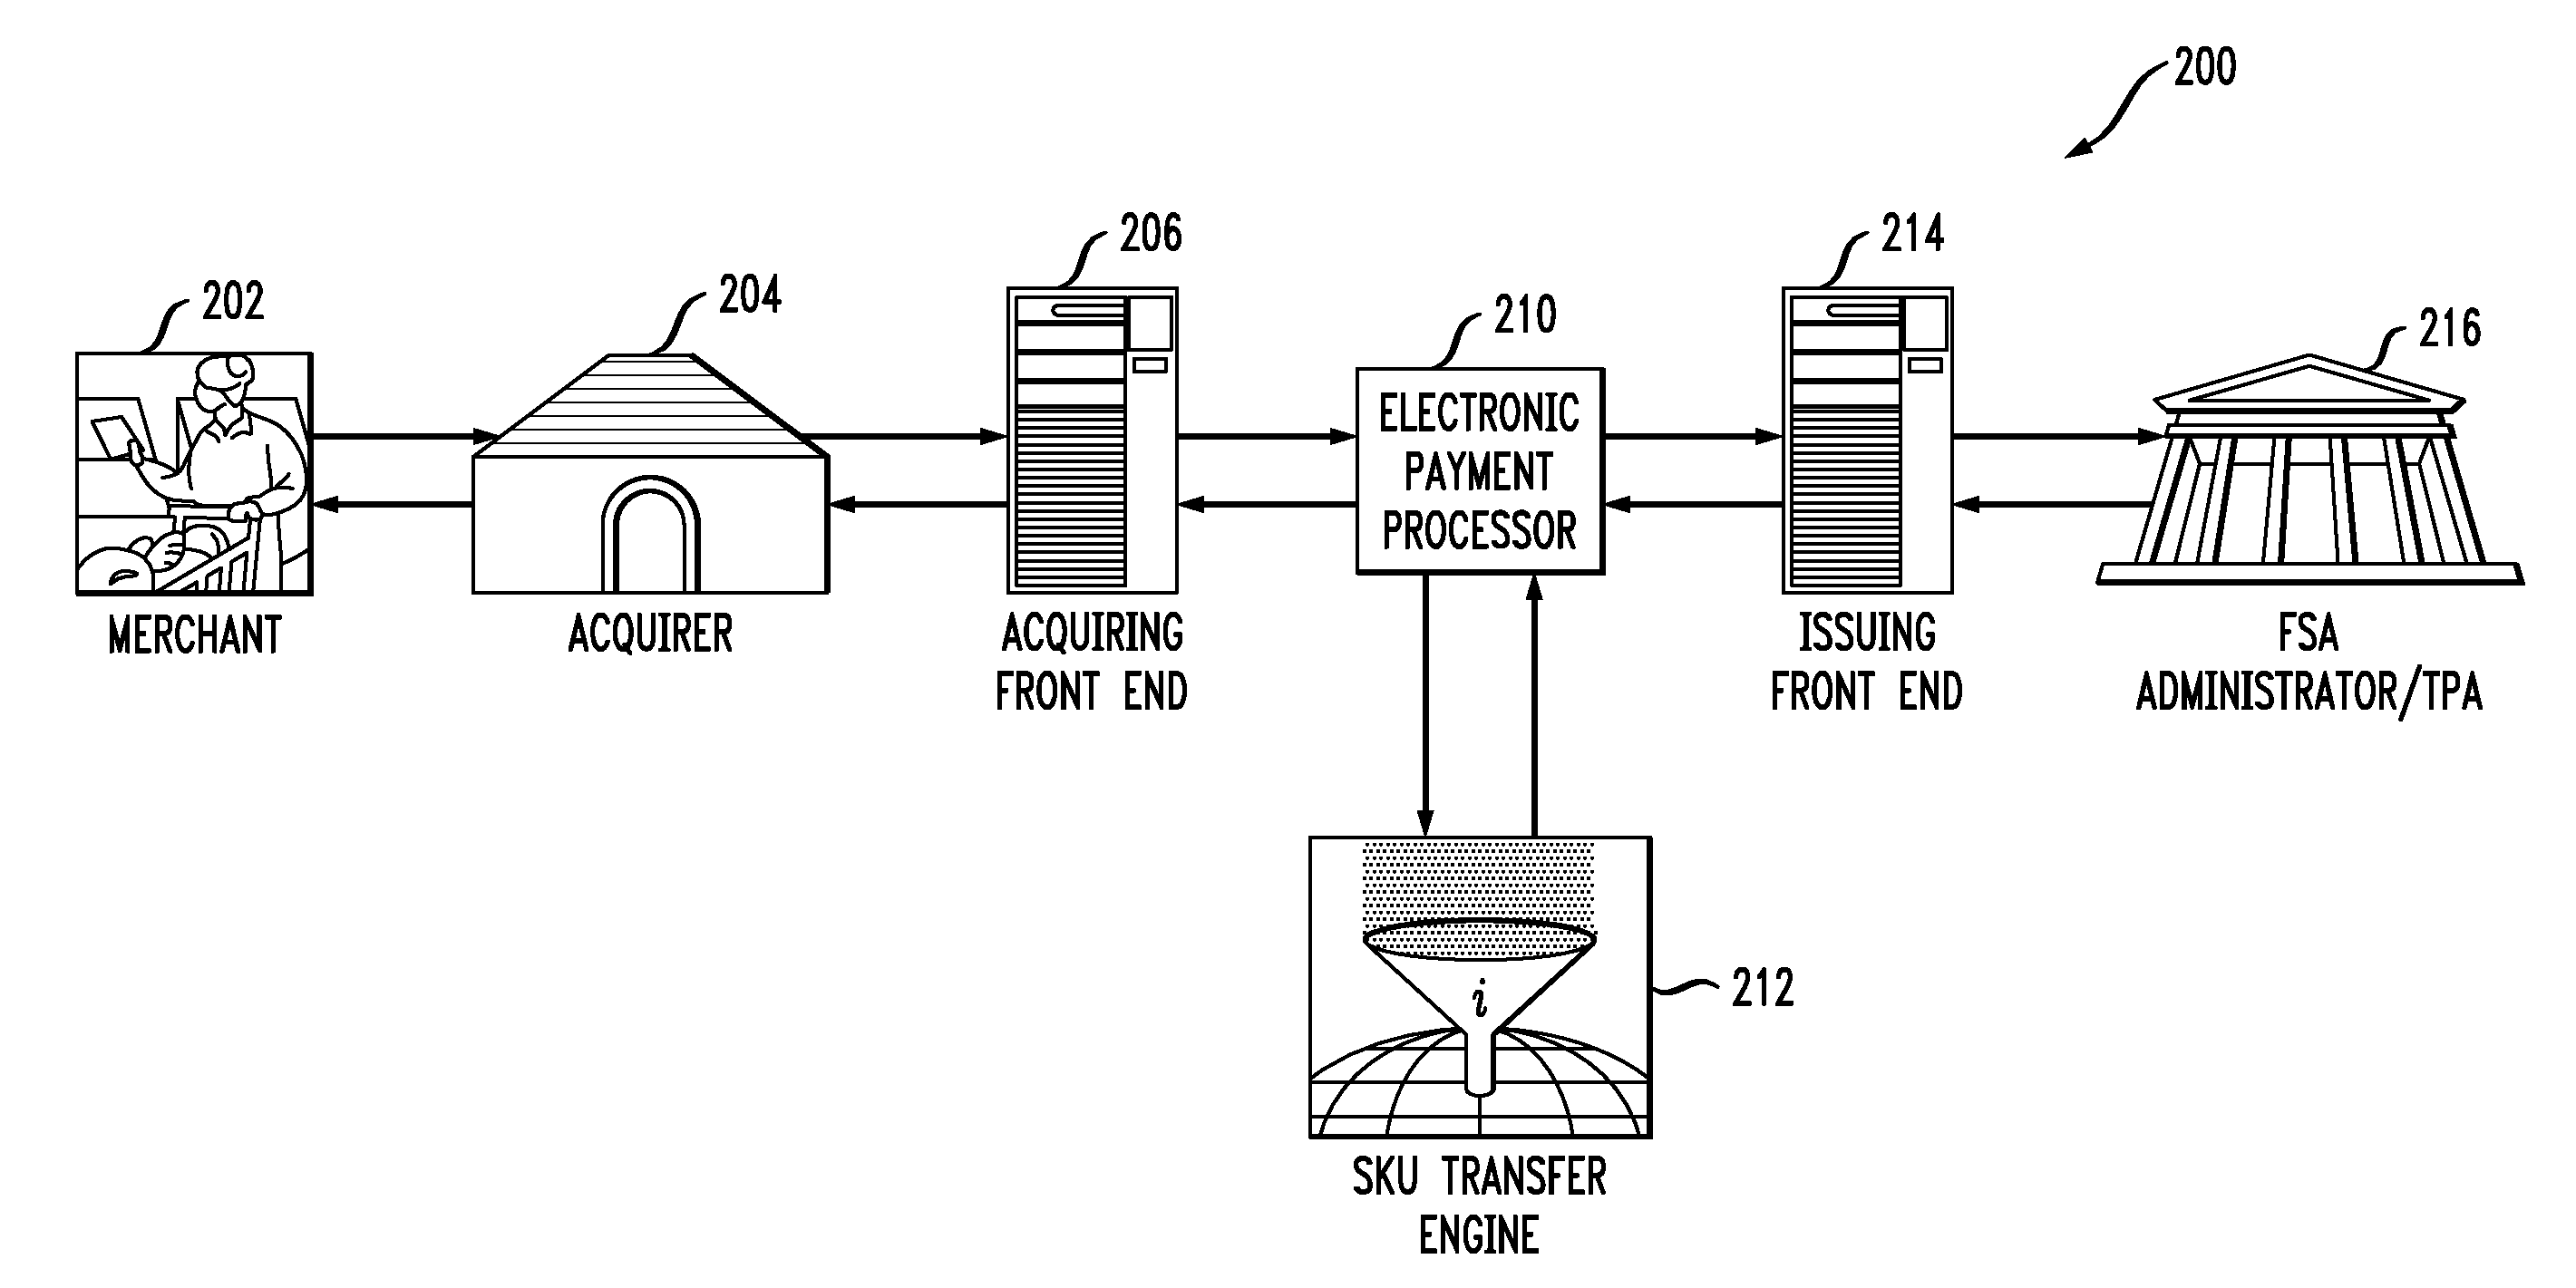 Method and System for Enabling Item-Level Approval of Payment Card